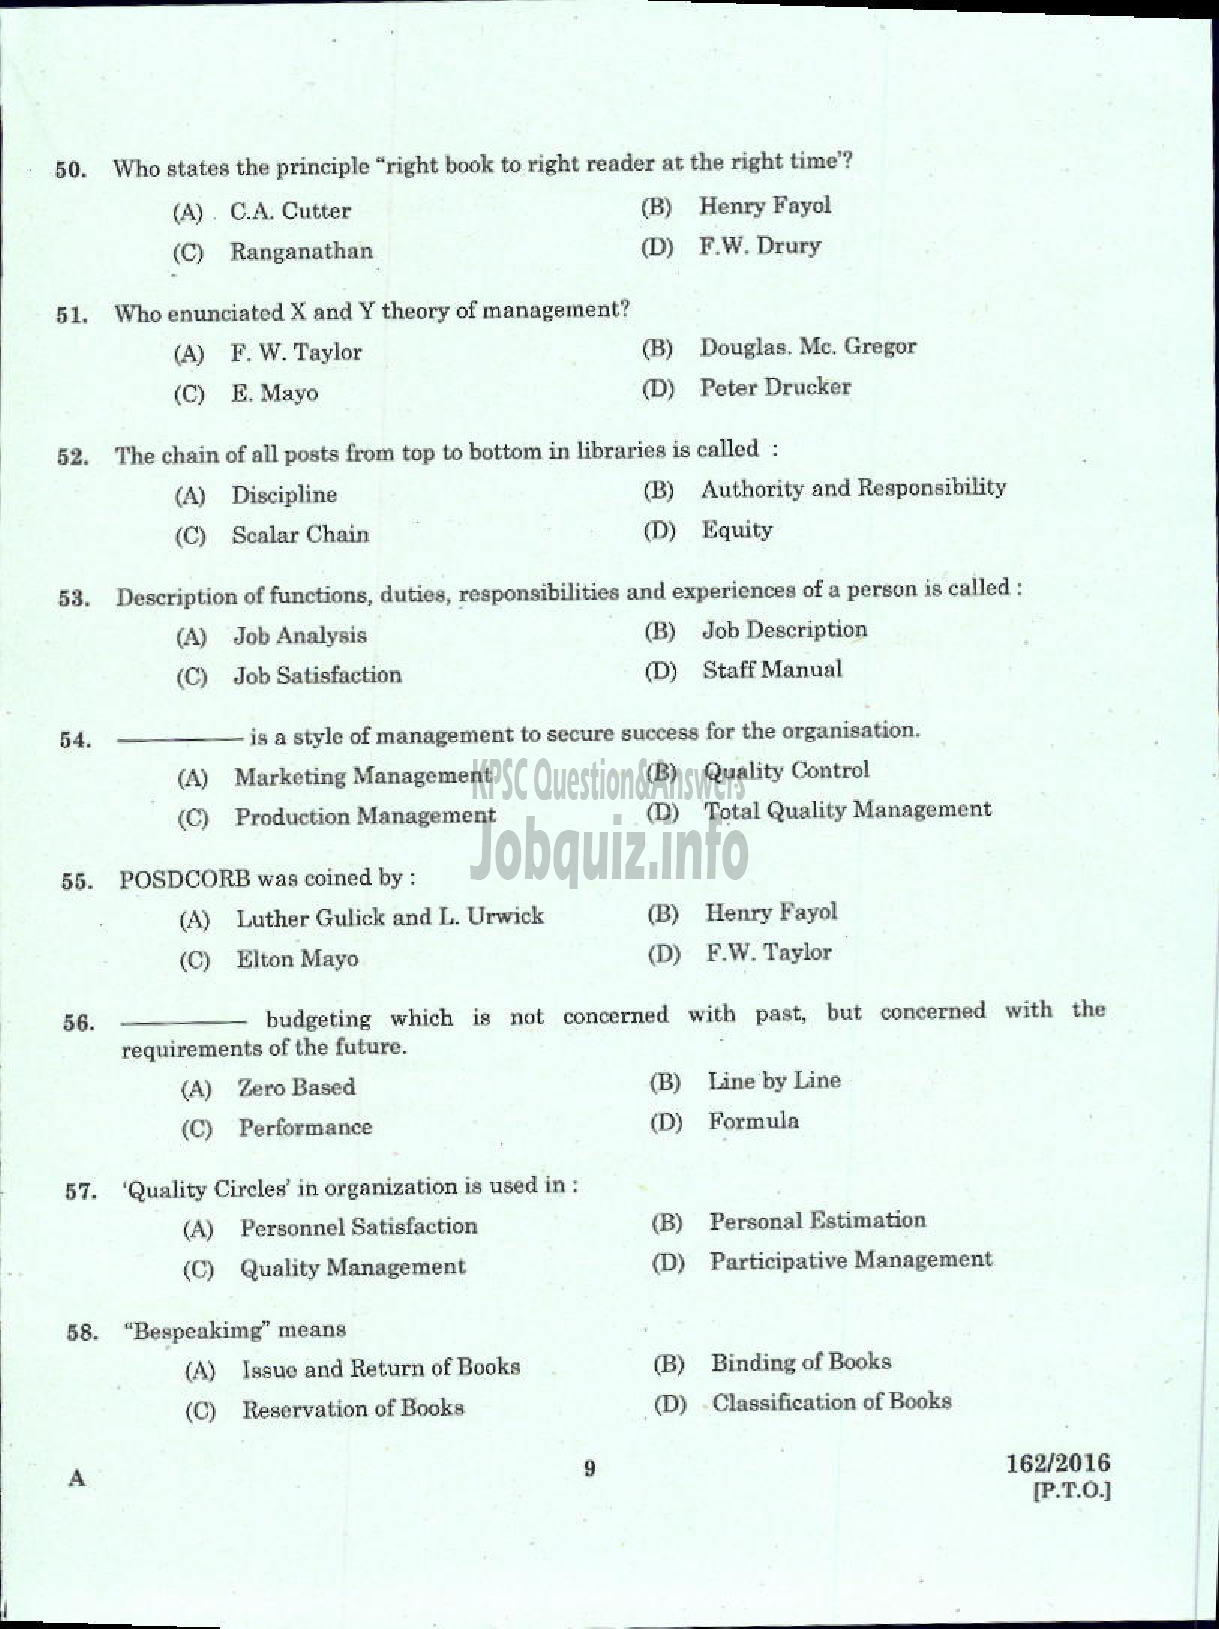 Kerala PSC Question Paper - LIBRARIAN GR IV KERALA COMMON POOL LIBRARY-7